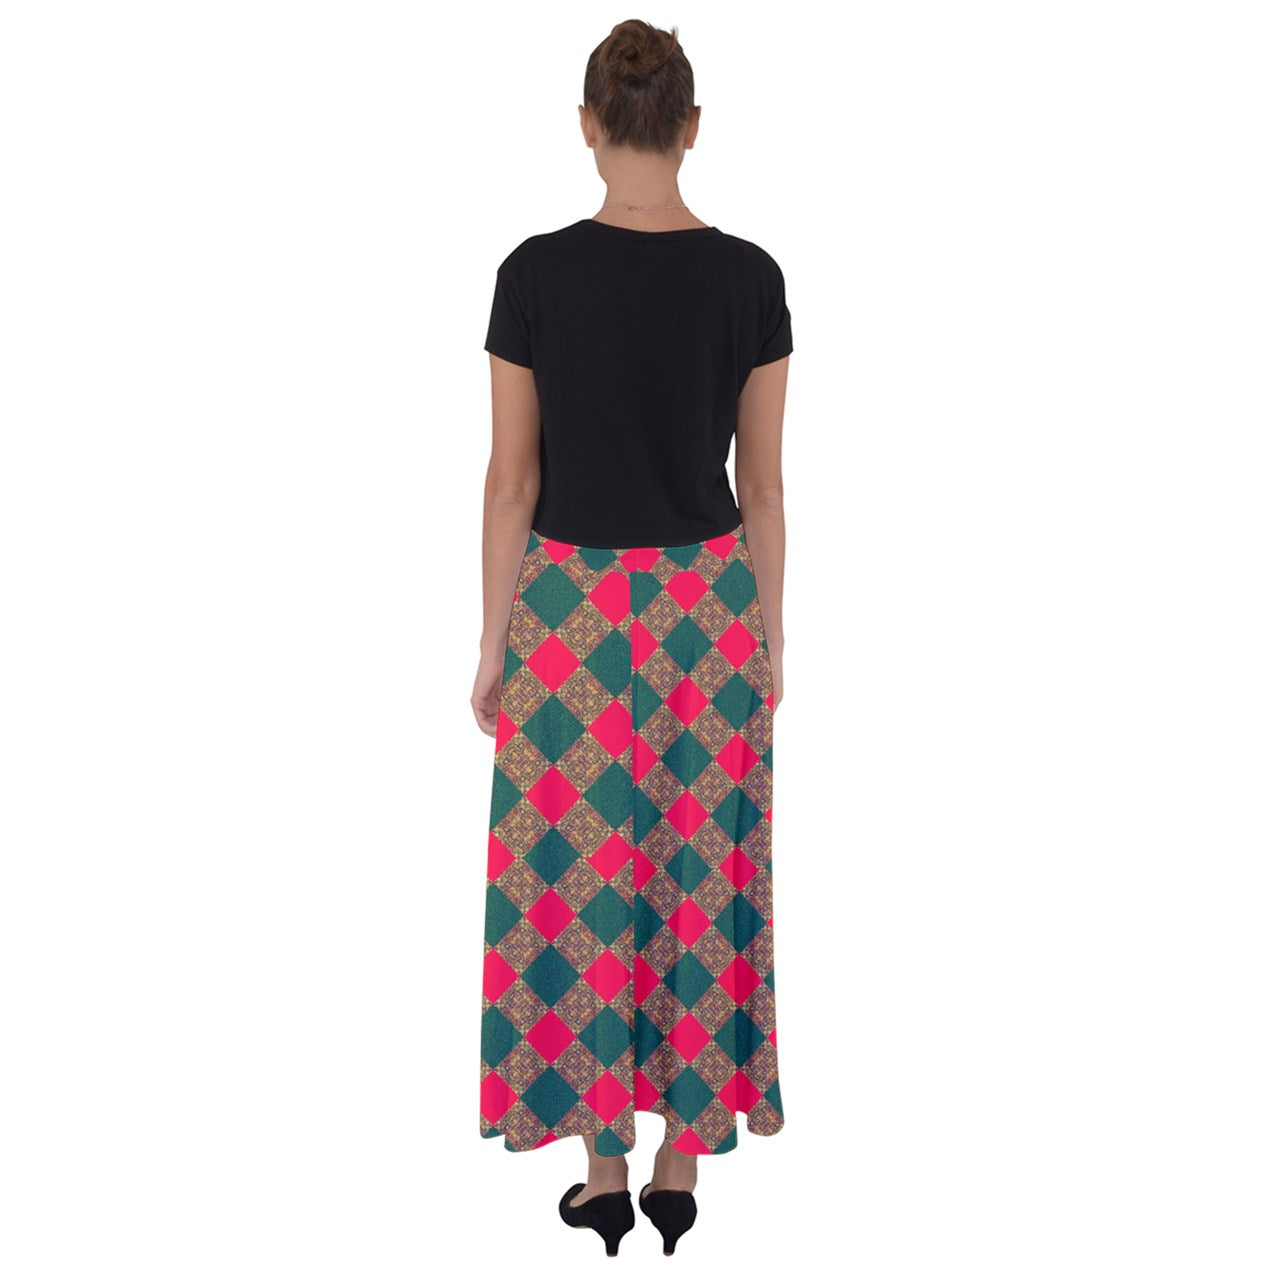 Yules Quilt Flared Maxi Skirt